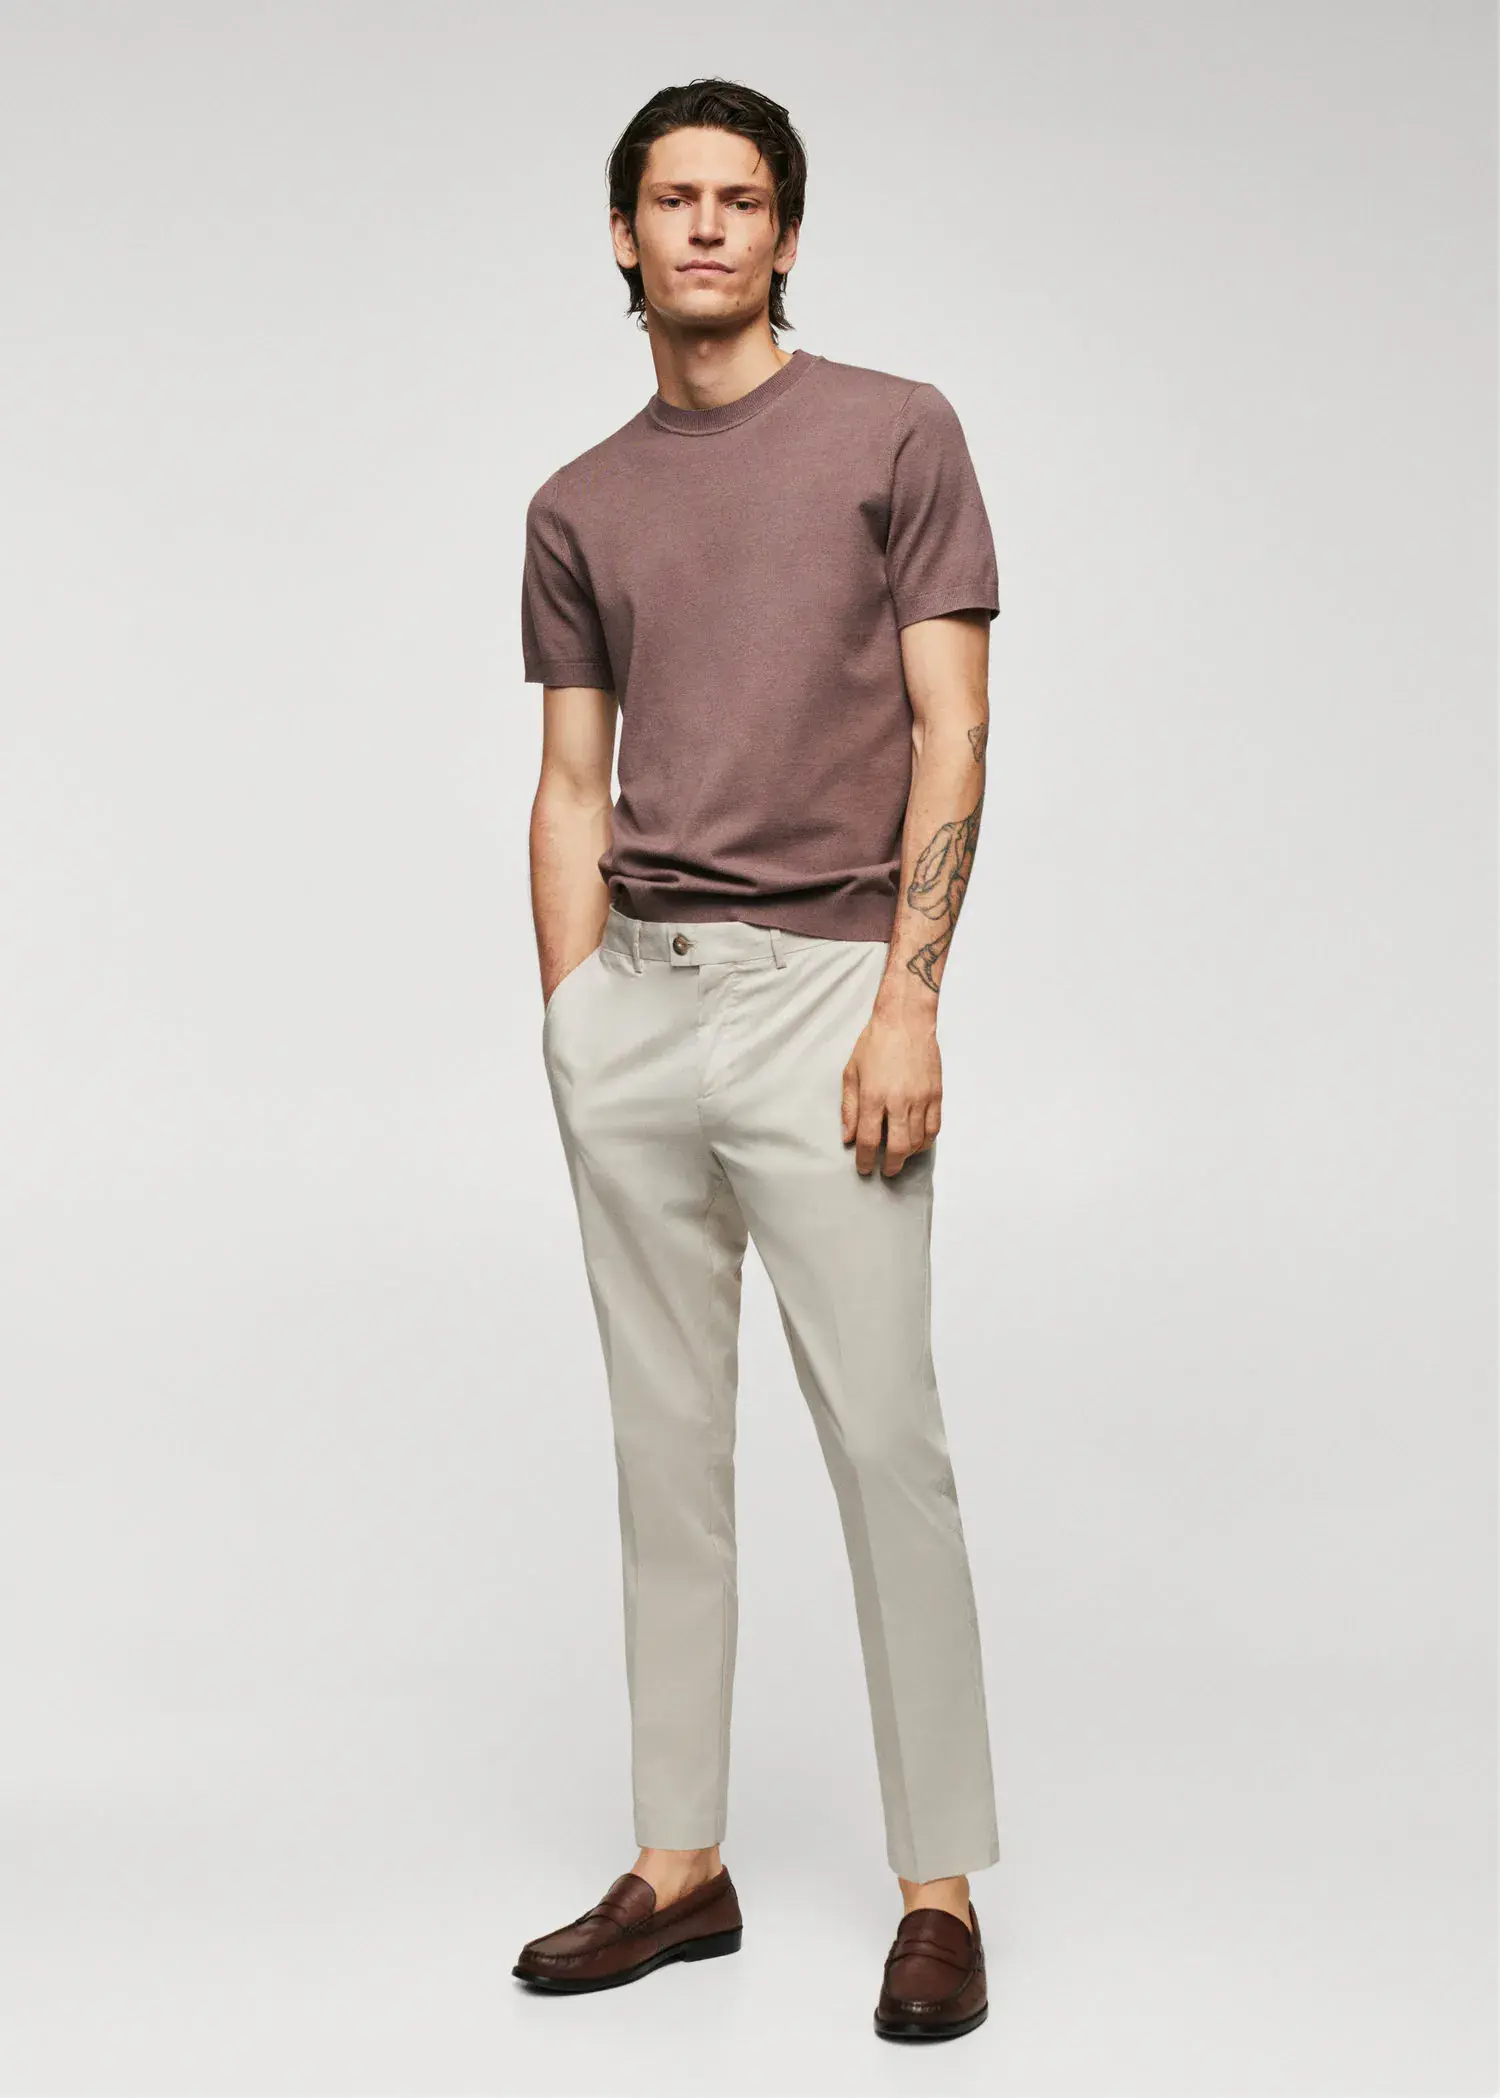 Mango Lightweight cotton pants. a man in a brown shirt and white pants. 